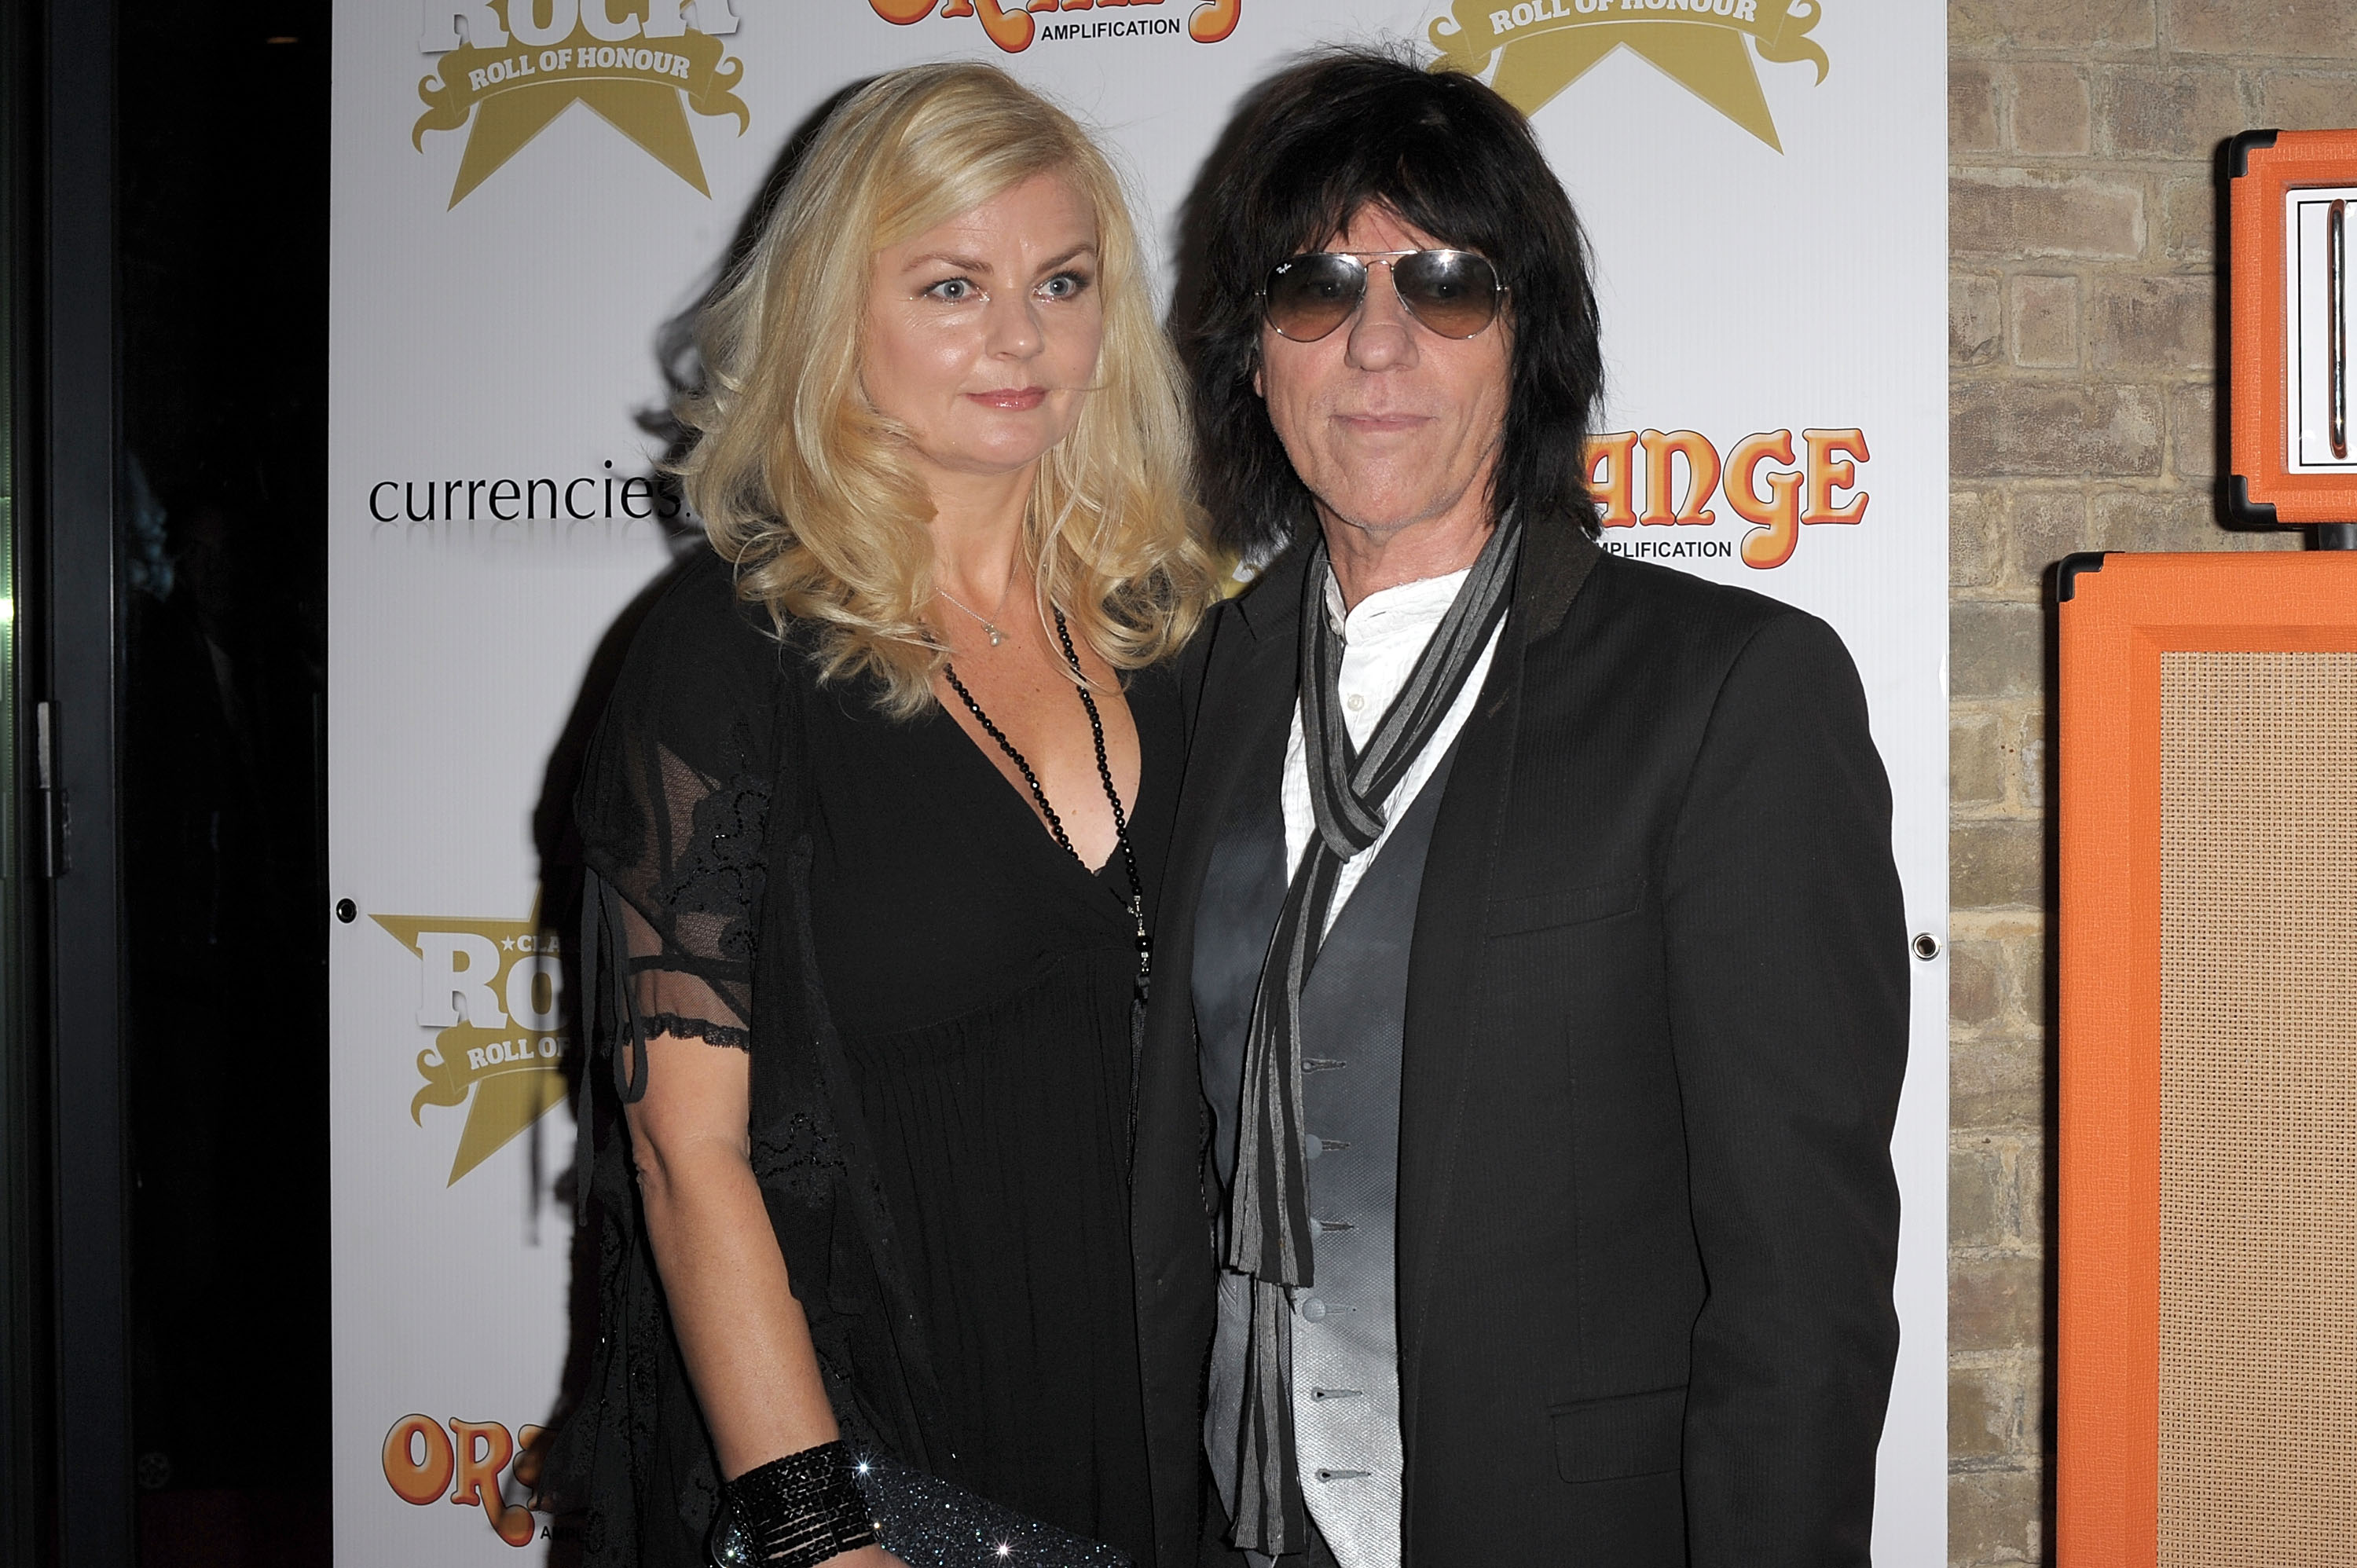 Jeff Beck Was Married Twice: More about His Wives